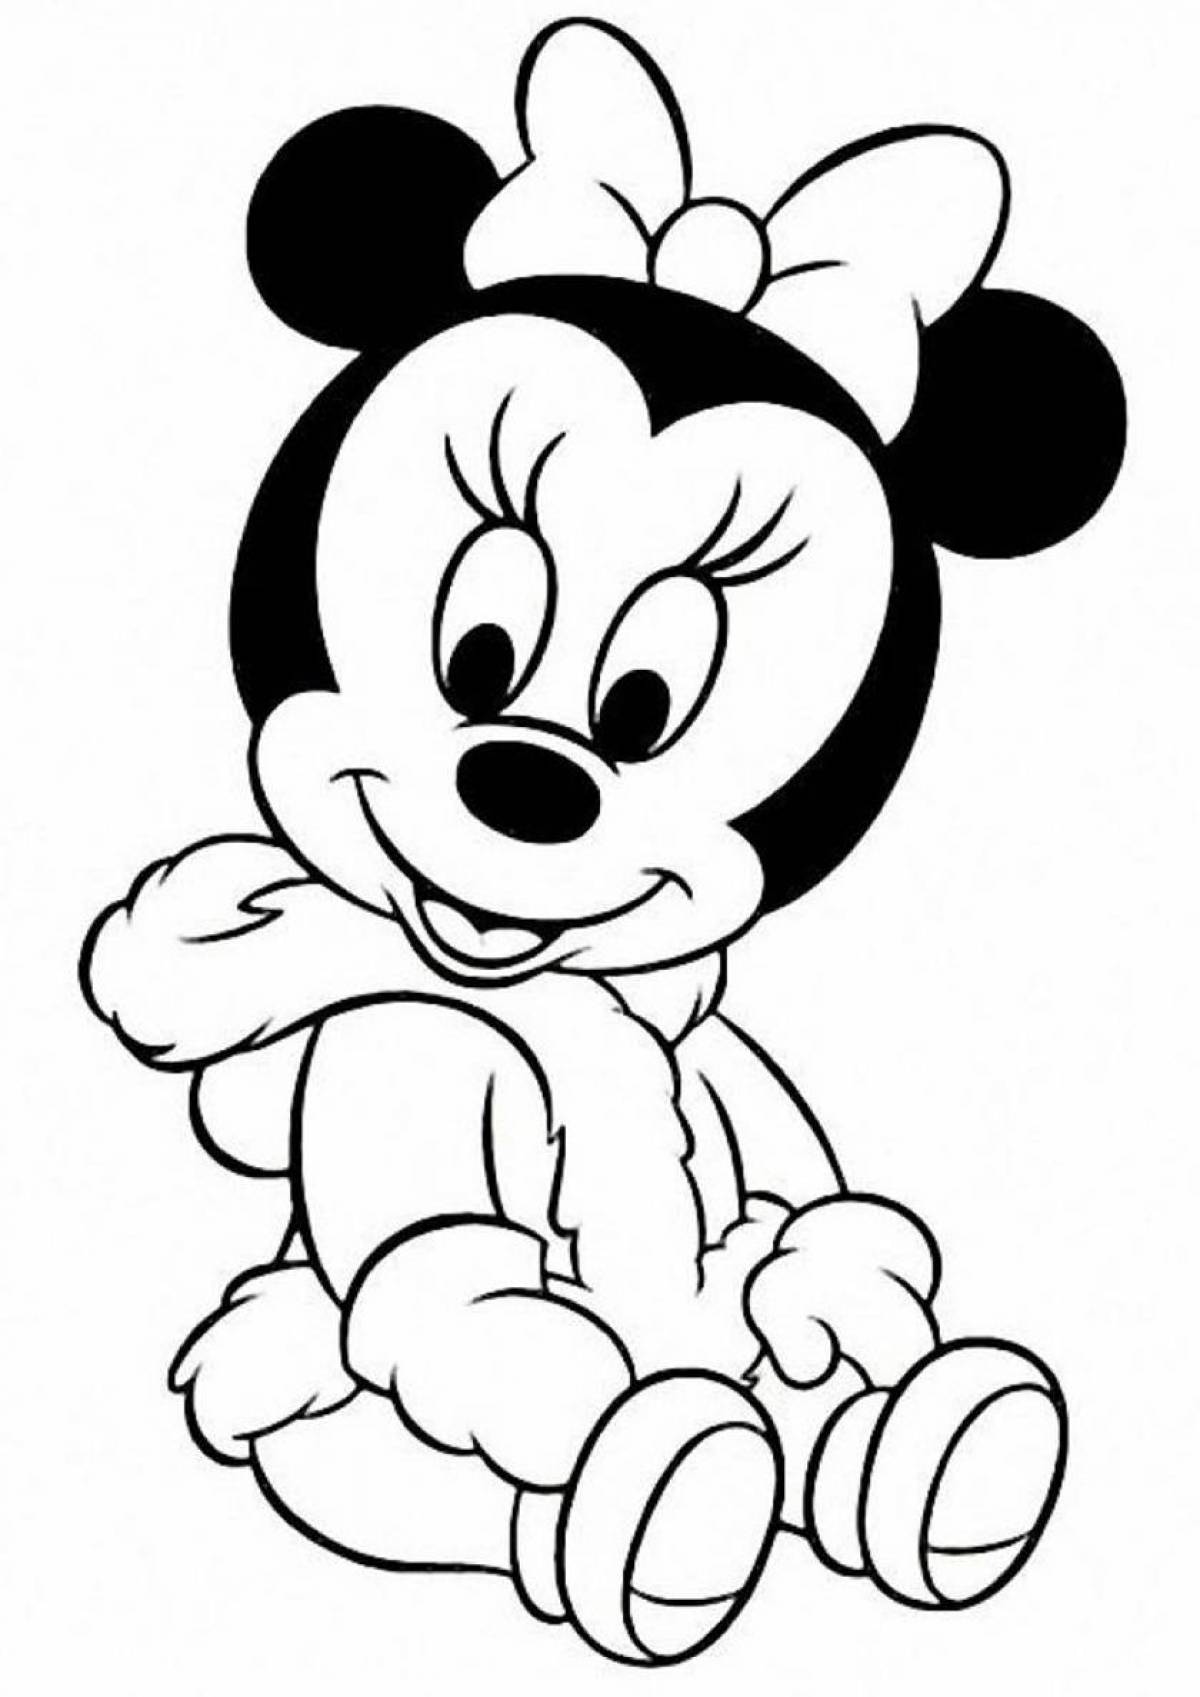 Colouring fearless mickey mouse